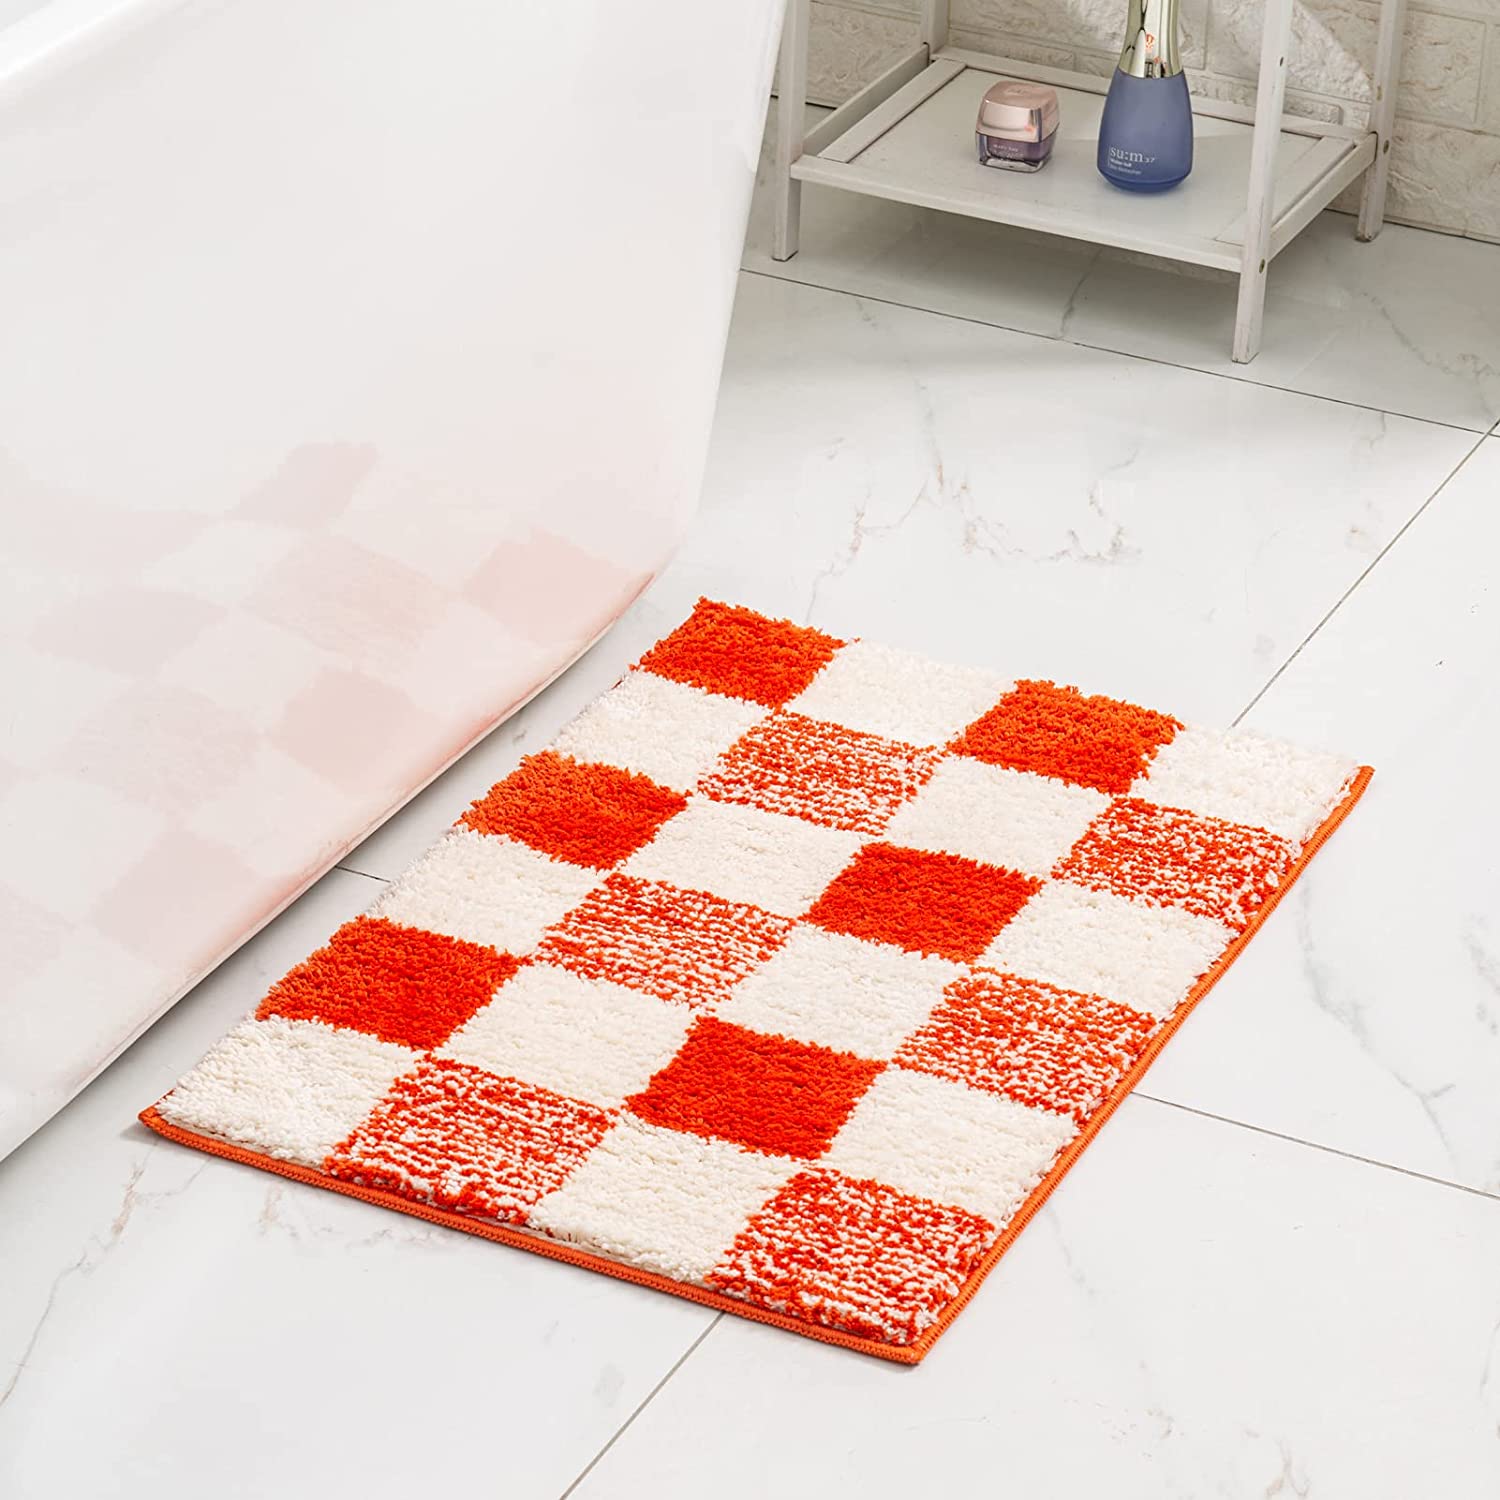 Feblilac Pink Checkerboard Bath Mat, Non-Slip Soft and Water-Absorbent